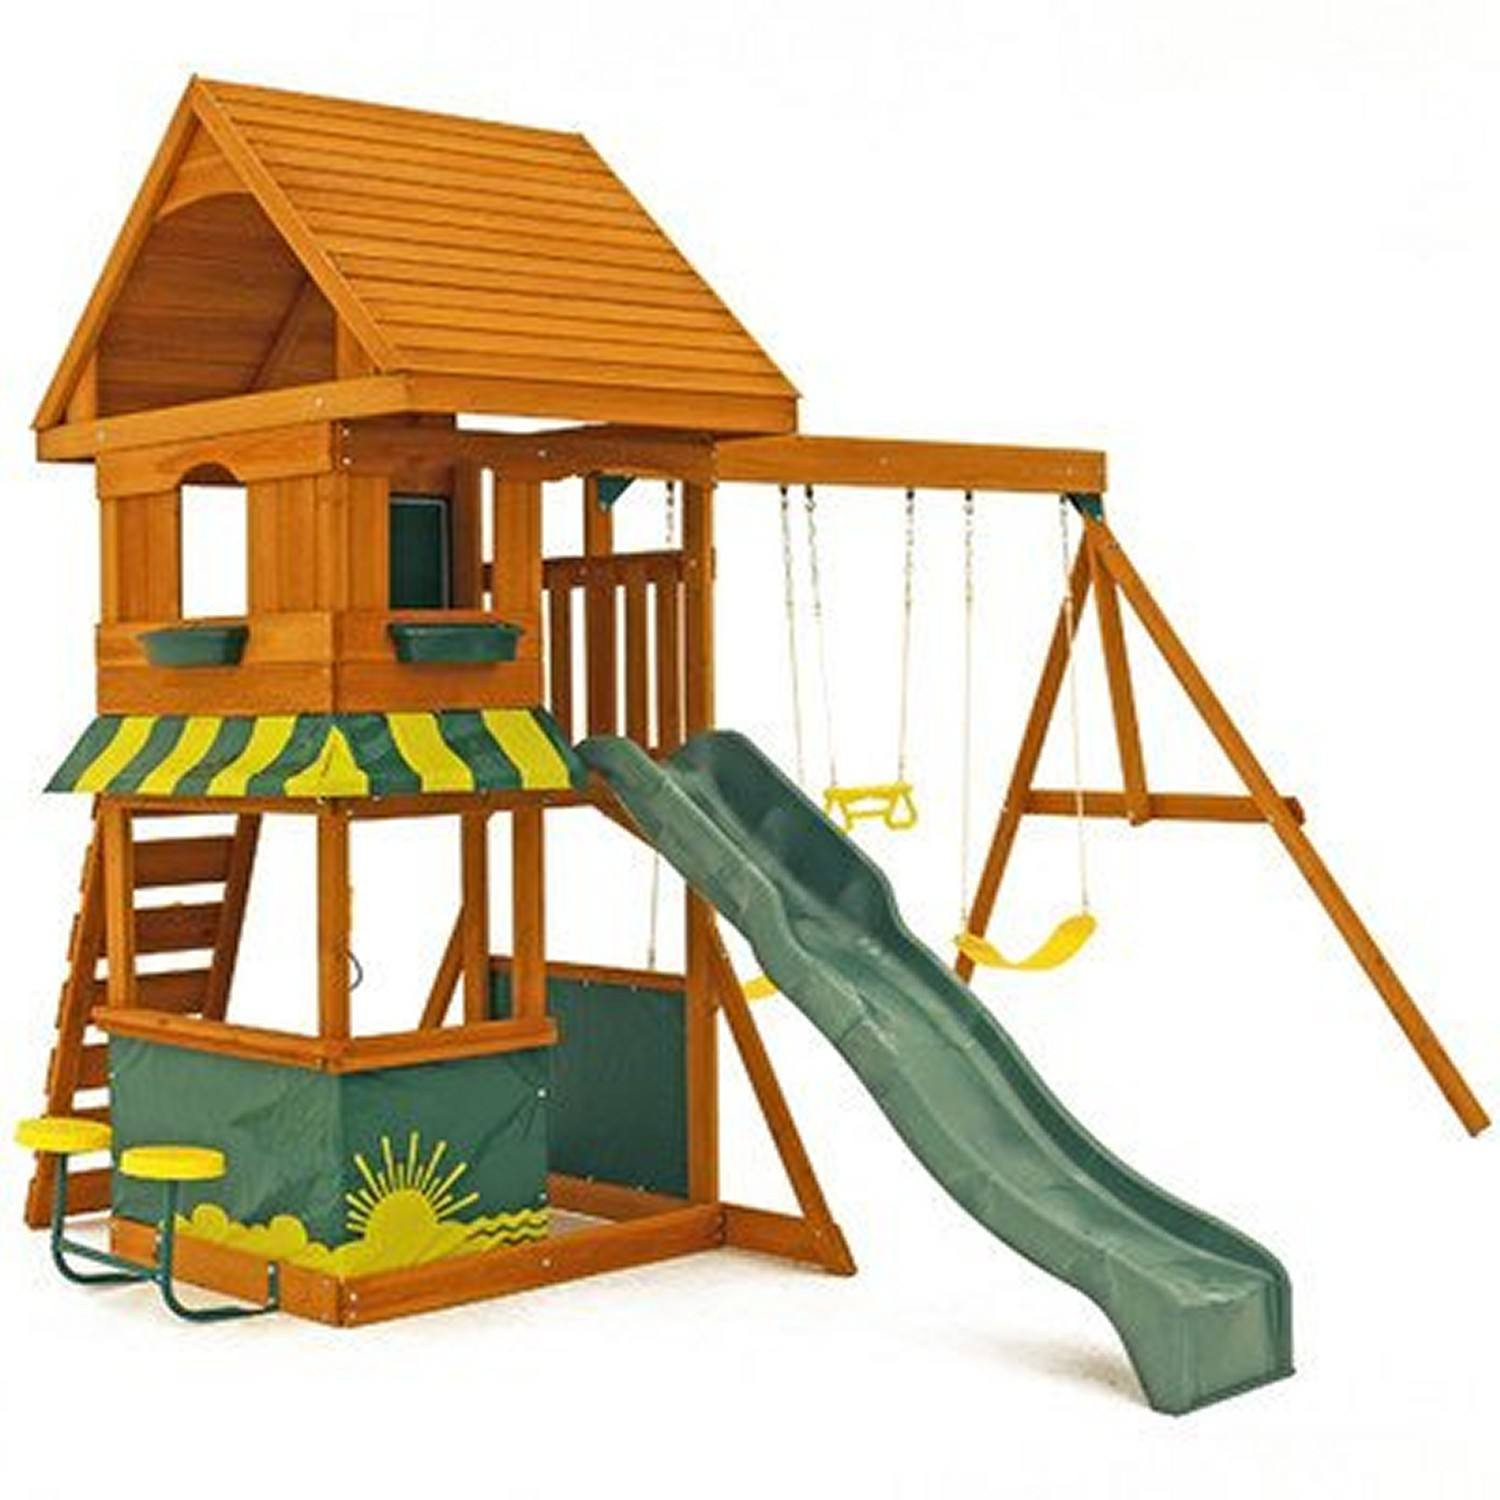 Best Playset For Backyard
 The 8 Best Wooden Swing Sets and Playsets to Buy in 2018